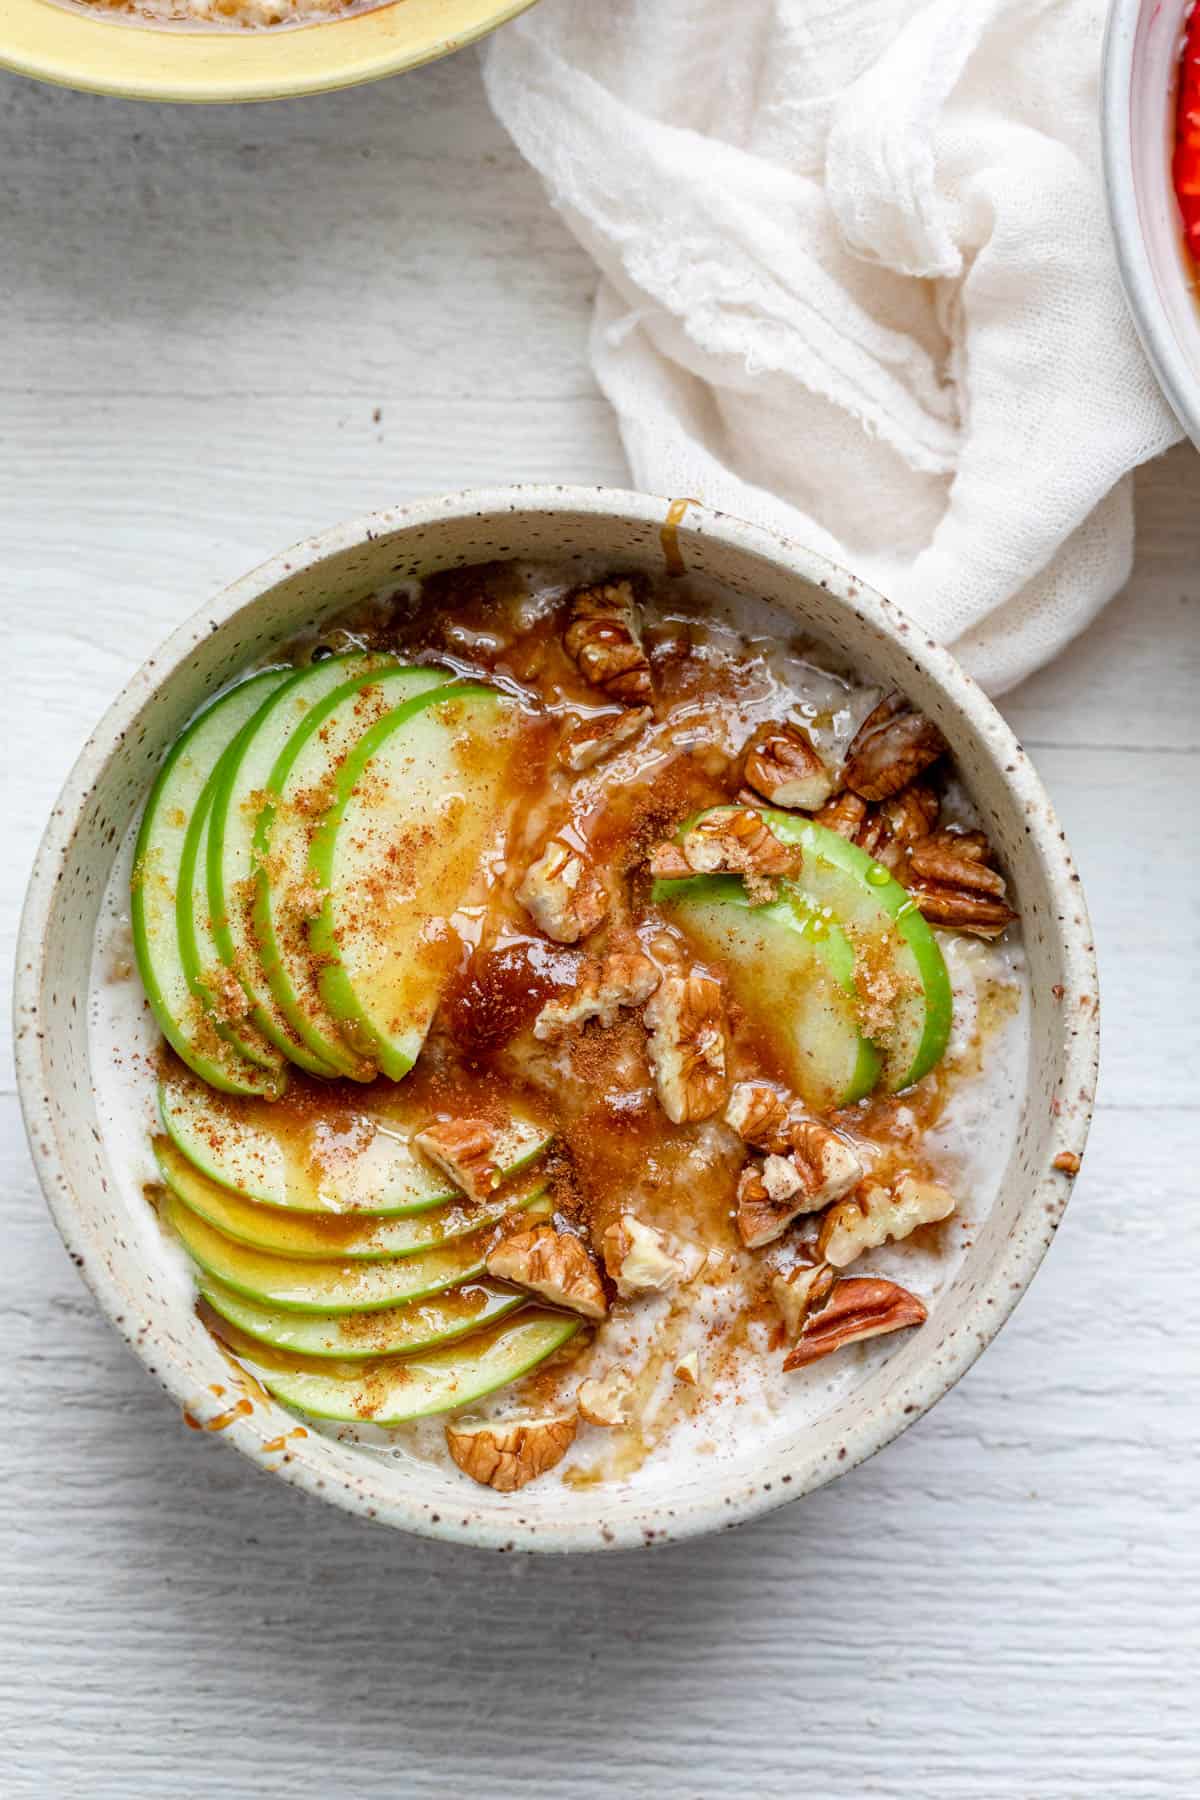 Sliced green apples, caramel sauce and pecans over oatmeal